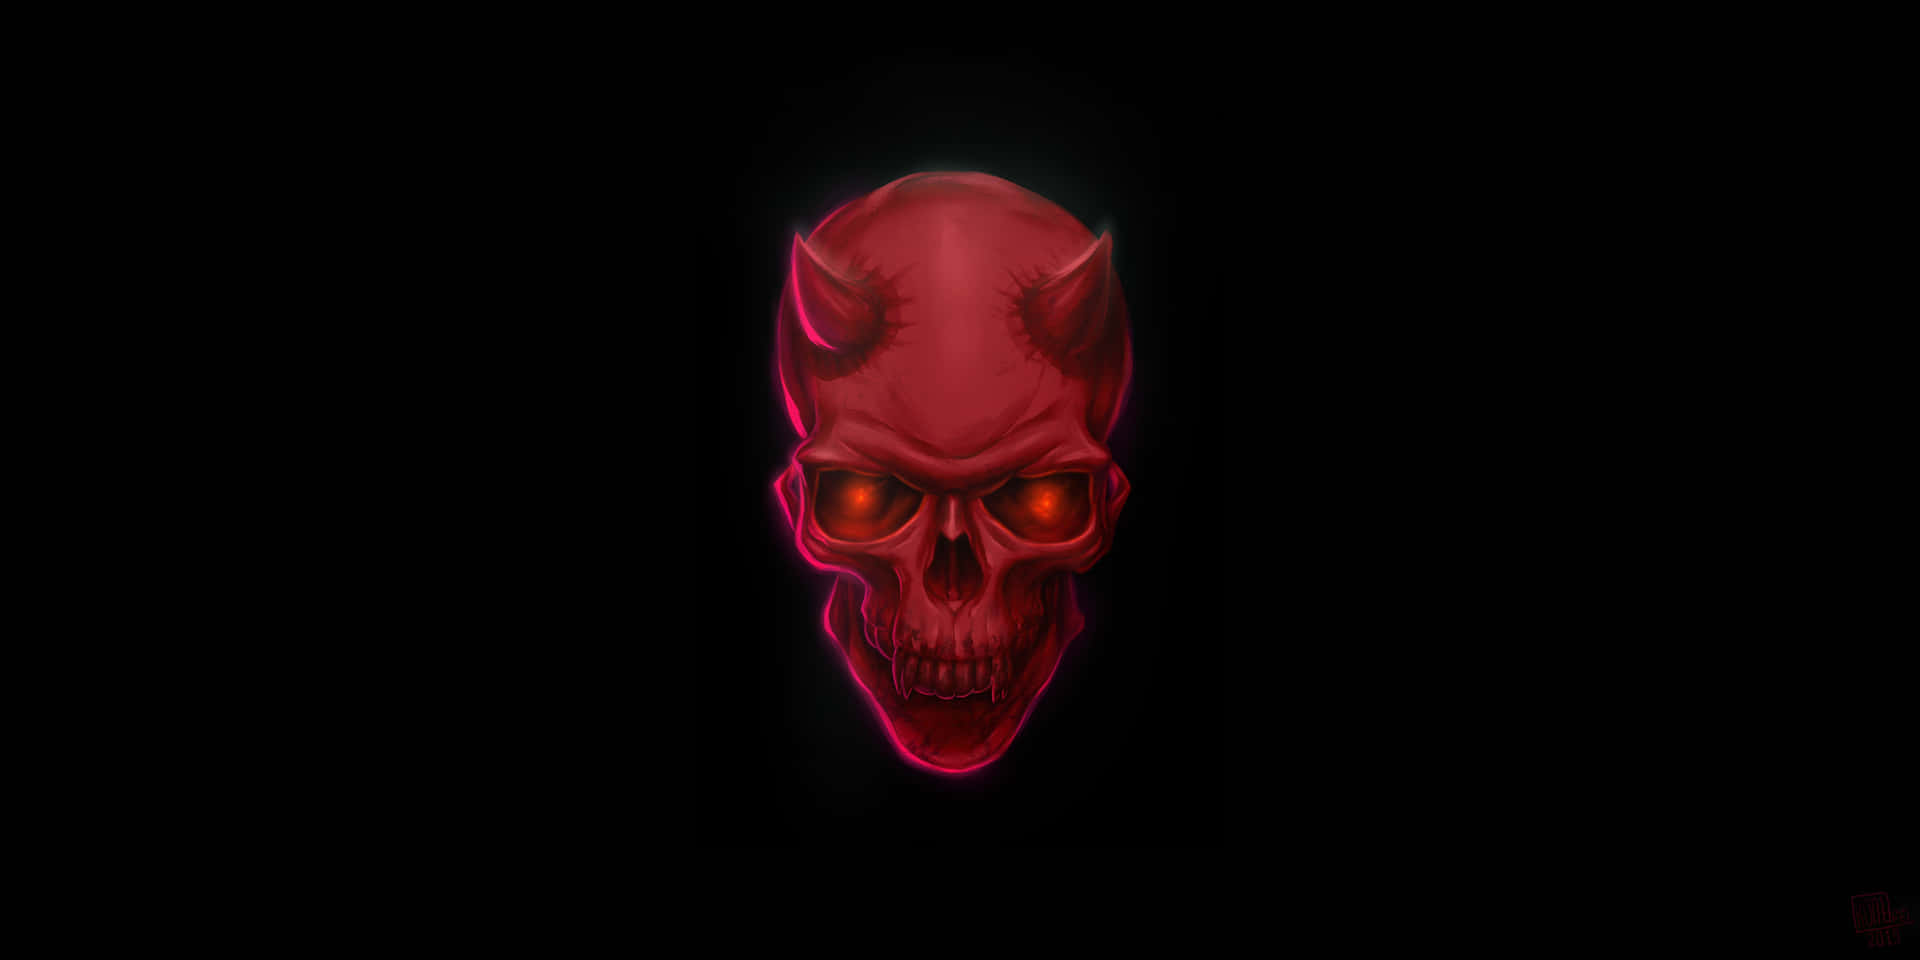 A Red Skull With Red Eyes On A Black Background Wallpaper